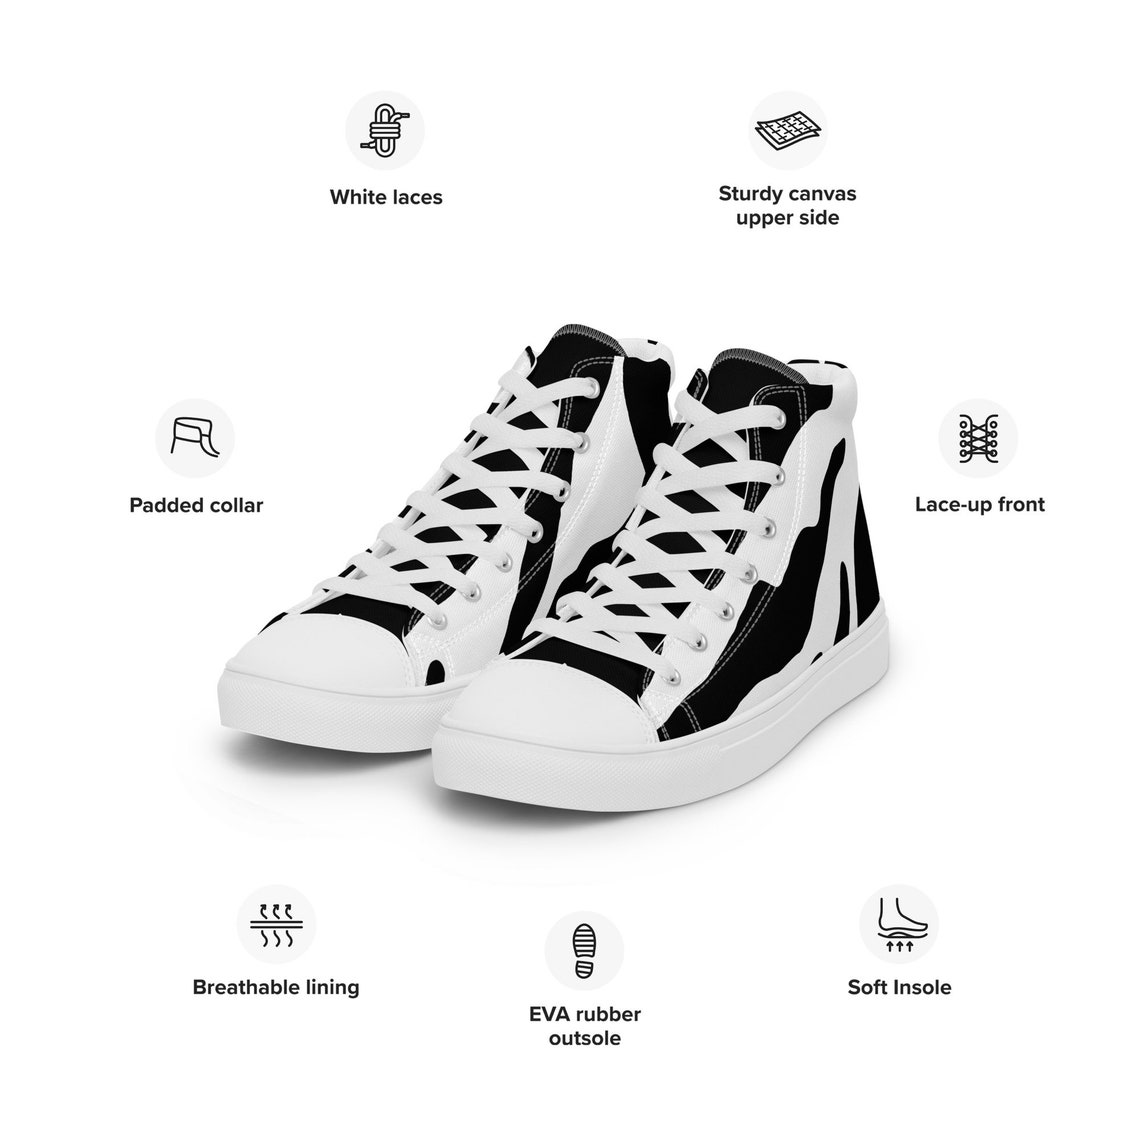 Zebra Sneakers for Your Urban Style Sneakers Animal Print Sports Shoes ...